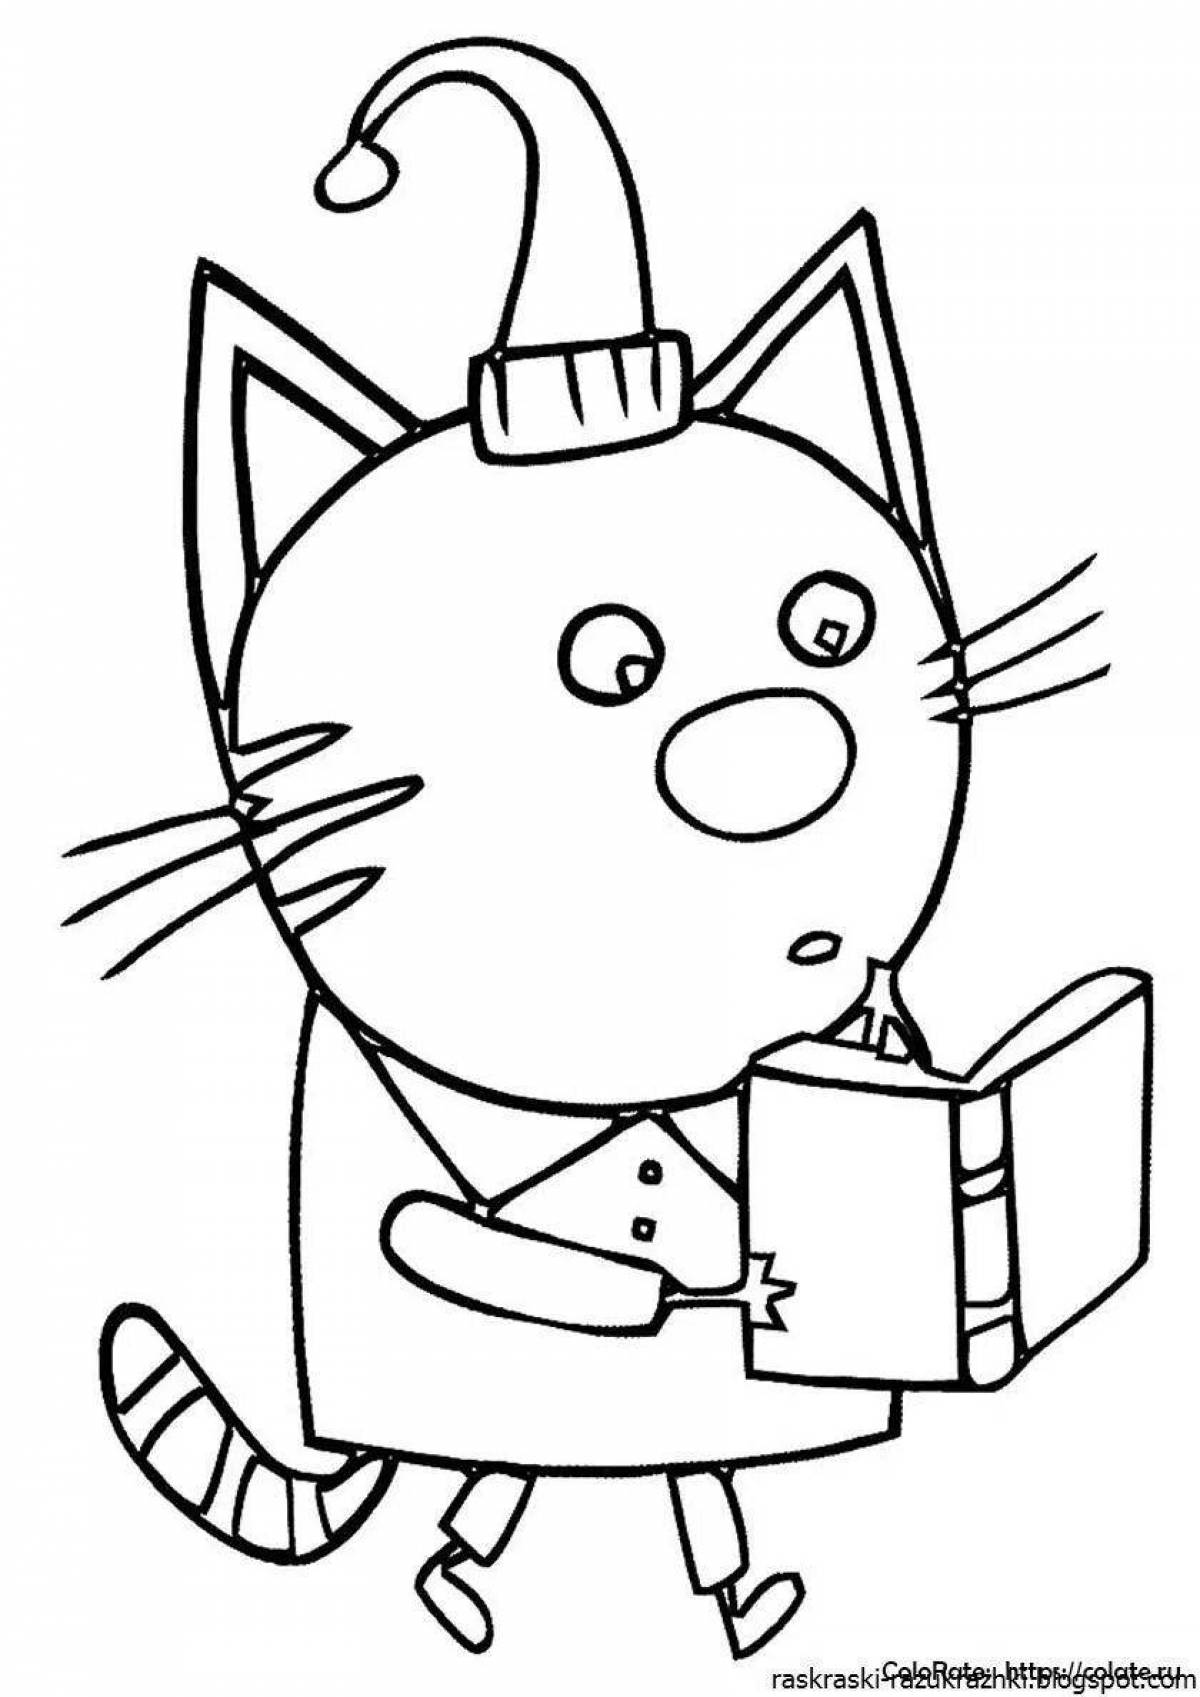 Three cats animated coloring book